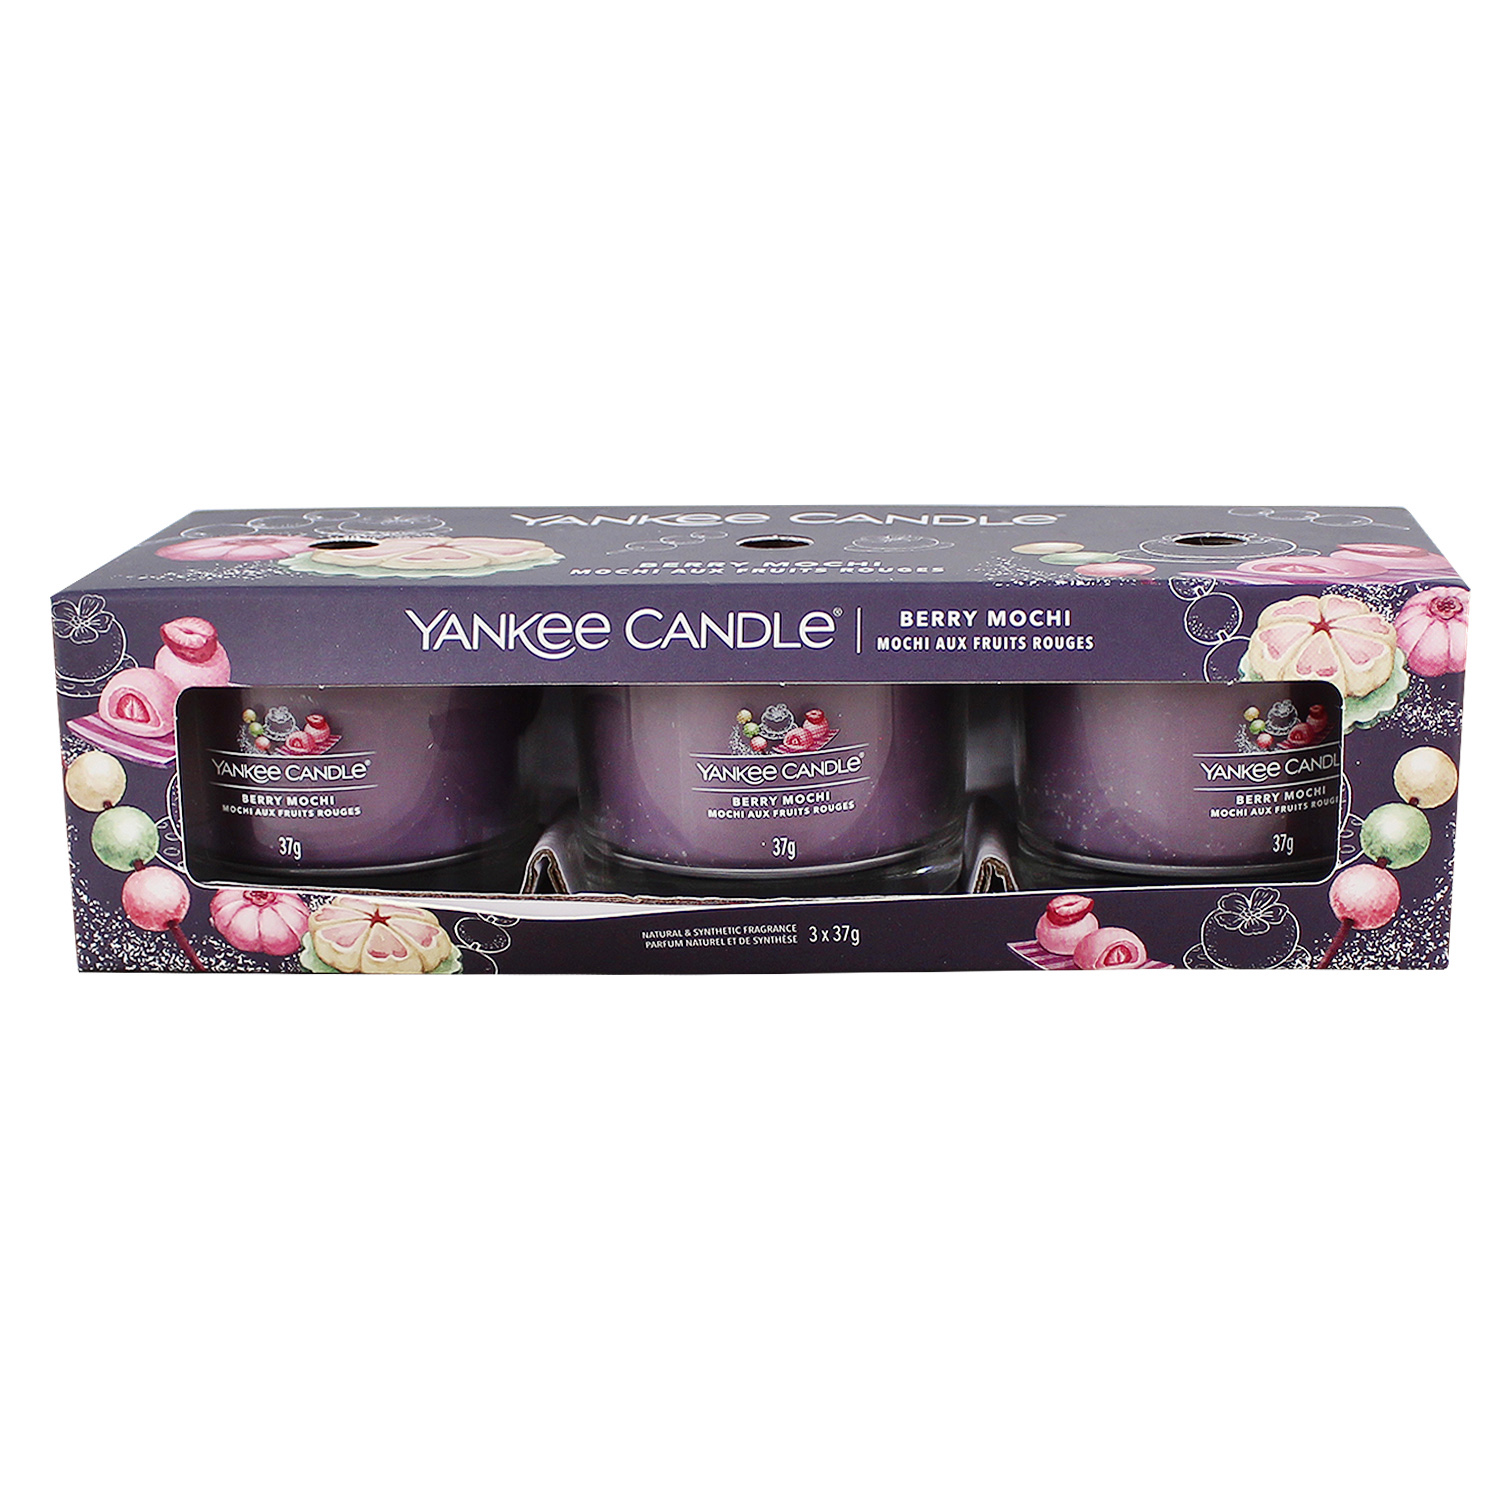 Yankee Candle Berry Mochi 3 Filled Votive Candle Gift Set - WeeklyDeals4Less